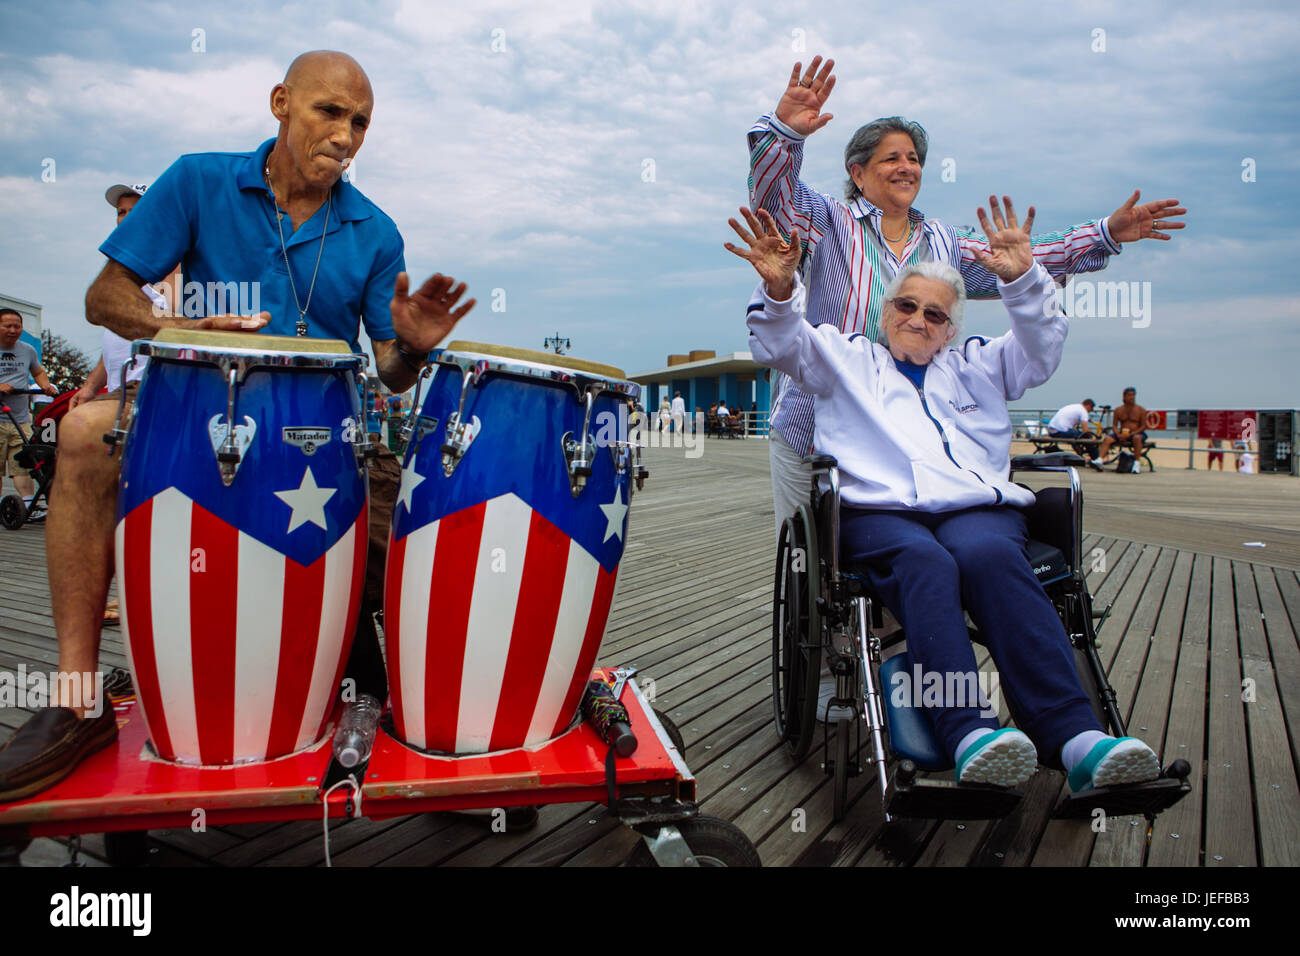 Puerto rico percusion musician playing the drums and an old lady in wheelchair waving arms in Coney Island boardwalk in summer weekend, Brooklyn, USA Stock Photo